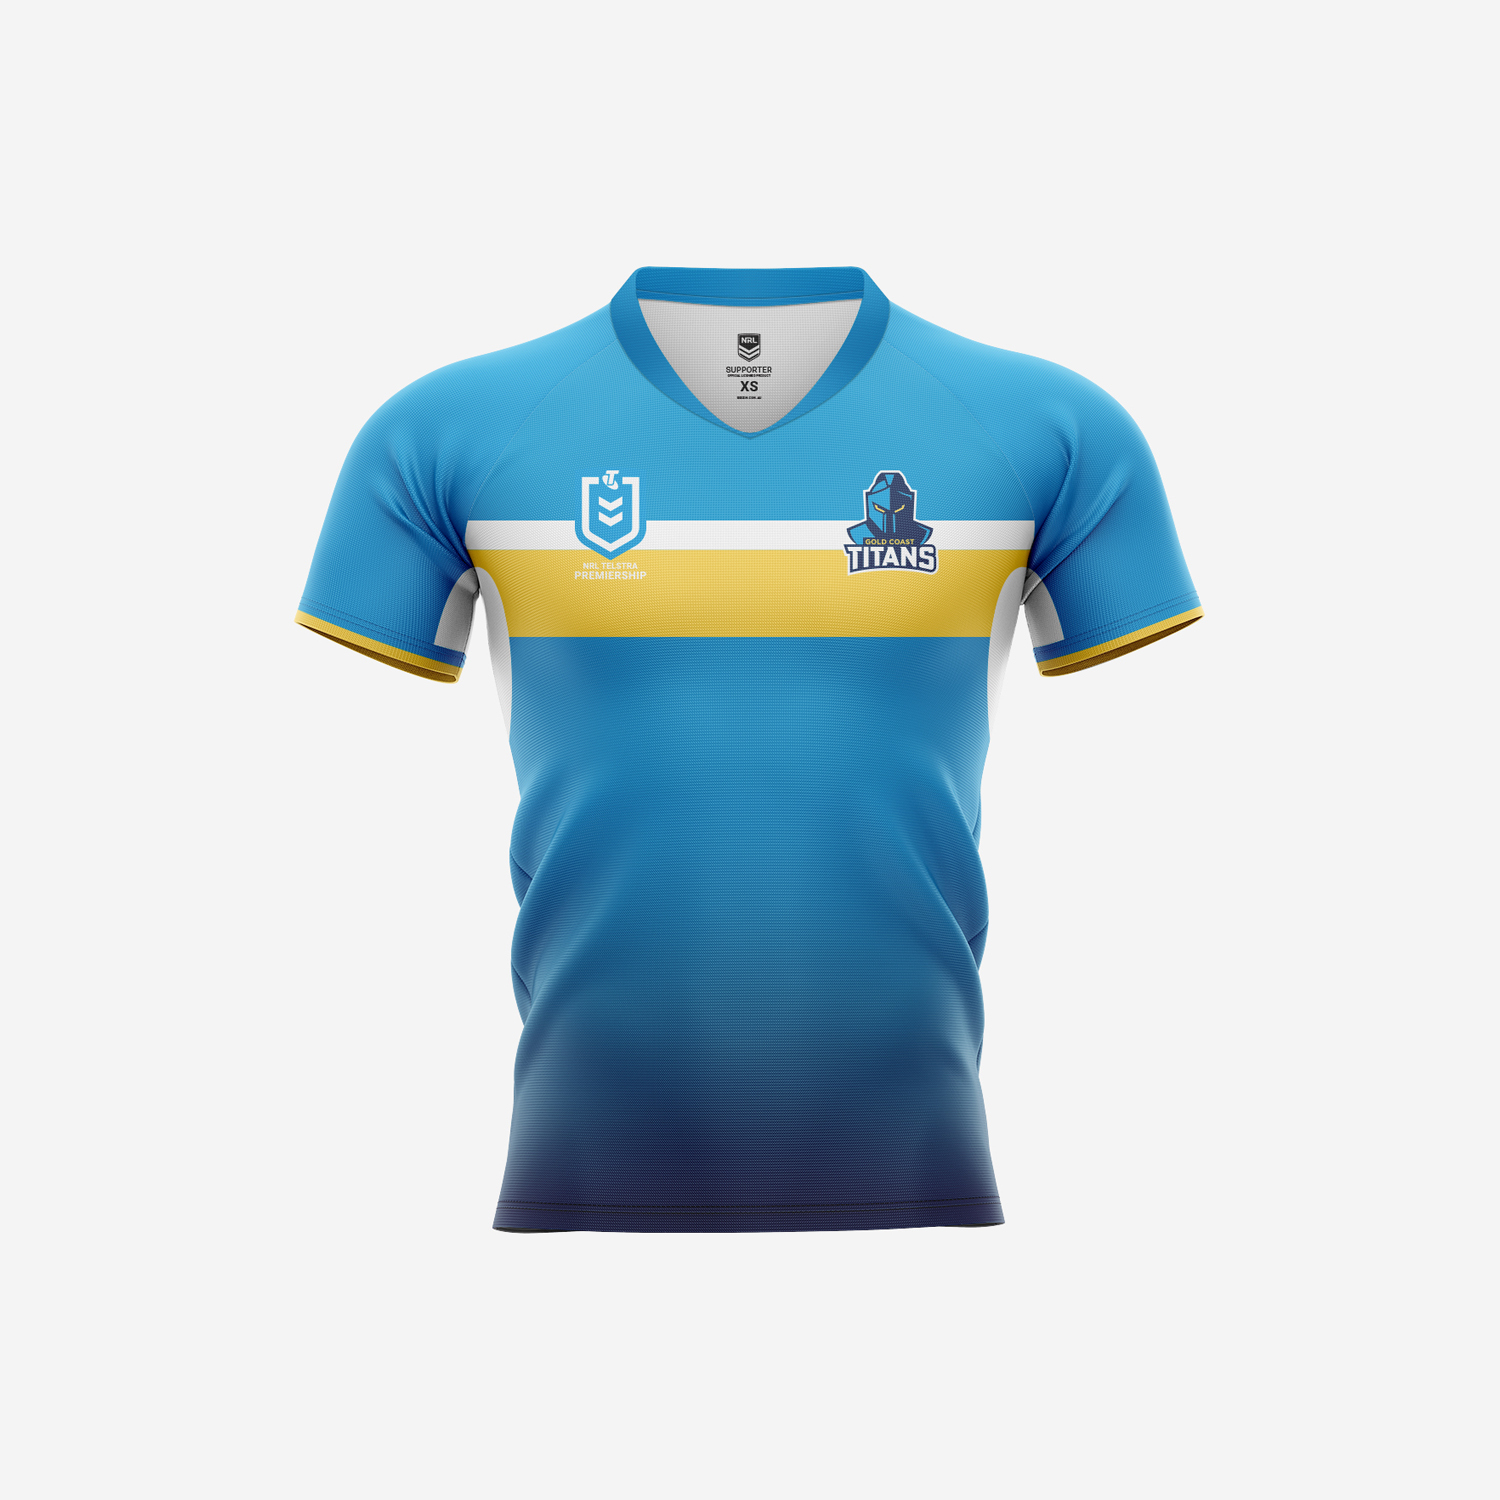 Titans Youth Jersey